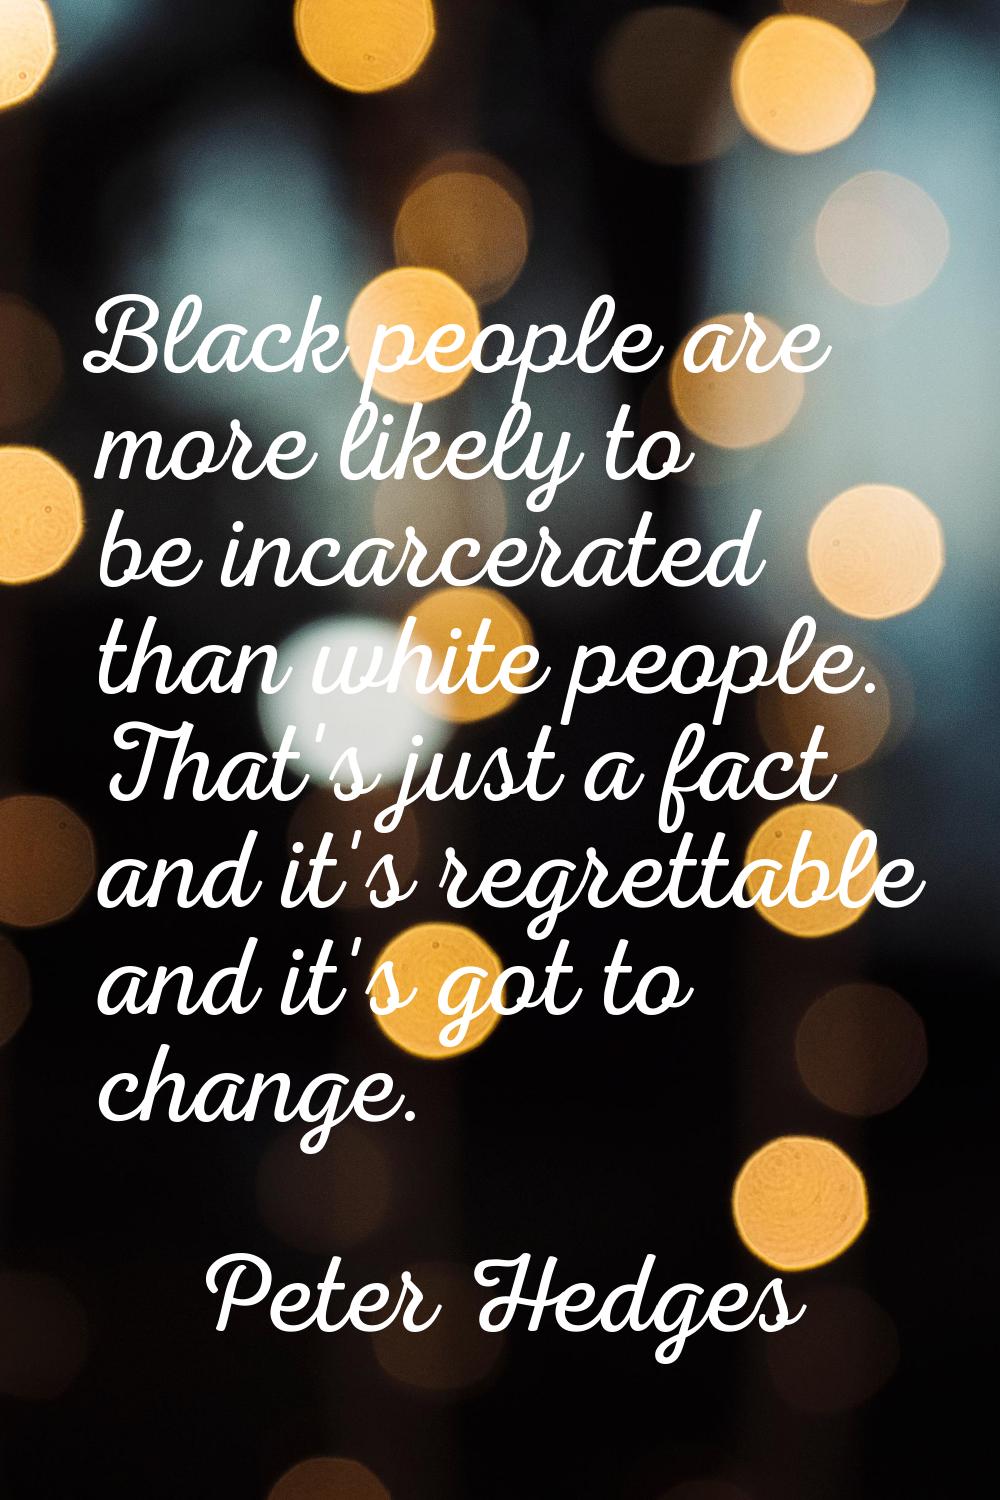 Black people are more likely to be incarcerated than white people. That's just a fact and it's regr